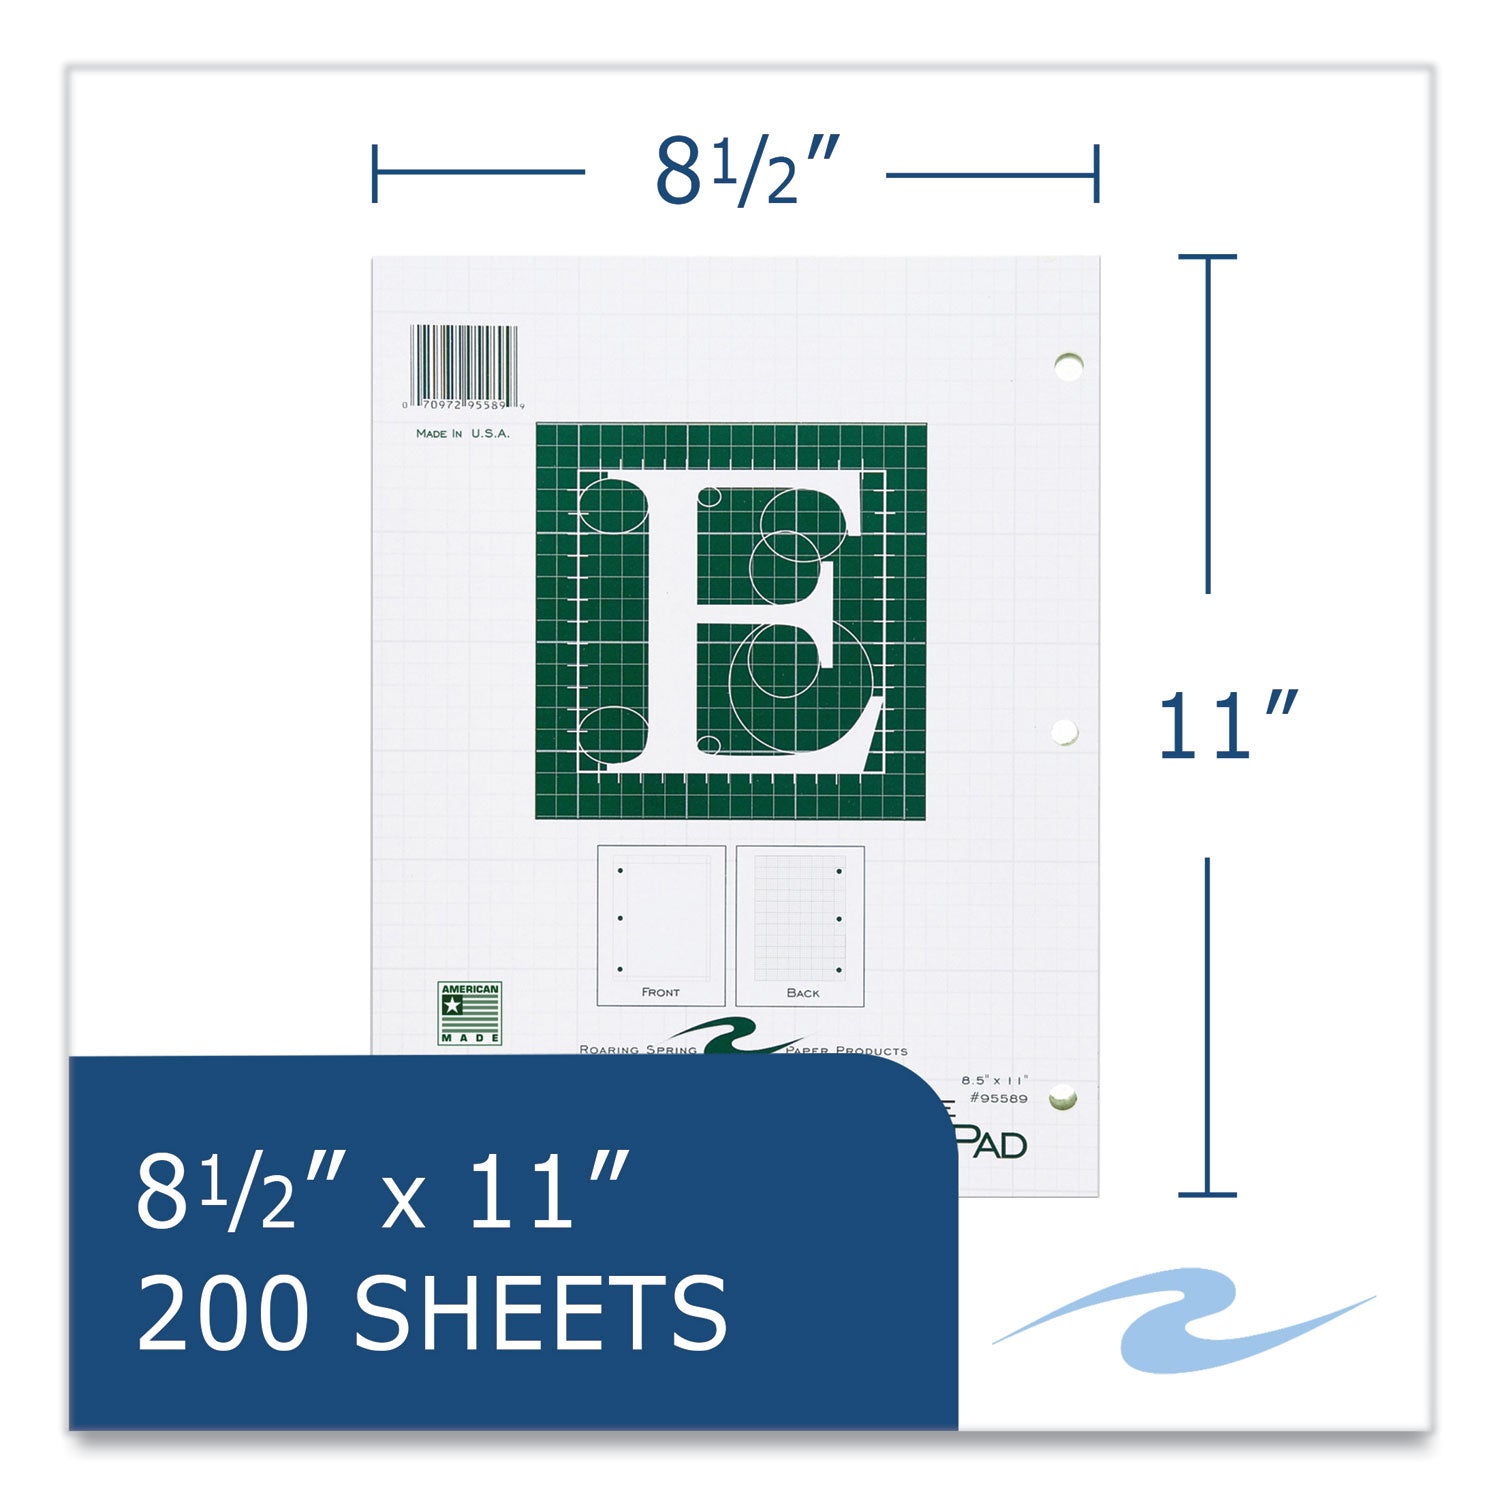 engineer-pad-125-margin-quad-rule-5-sq-in-1-sq-in-200-lt-green-85x11-sheets-pad-12-ct-ships-in-4-6-business-days_roa95589cs - 8